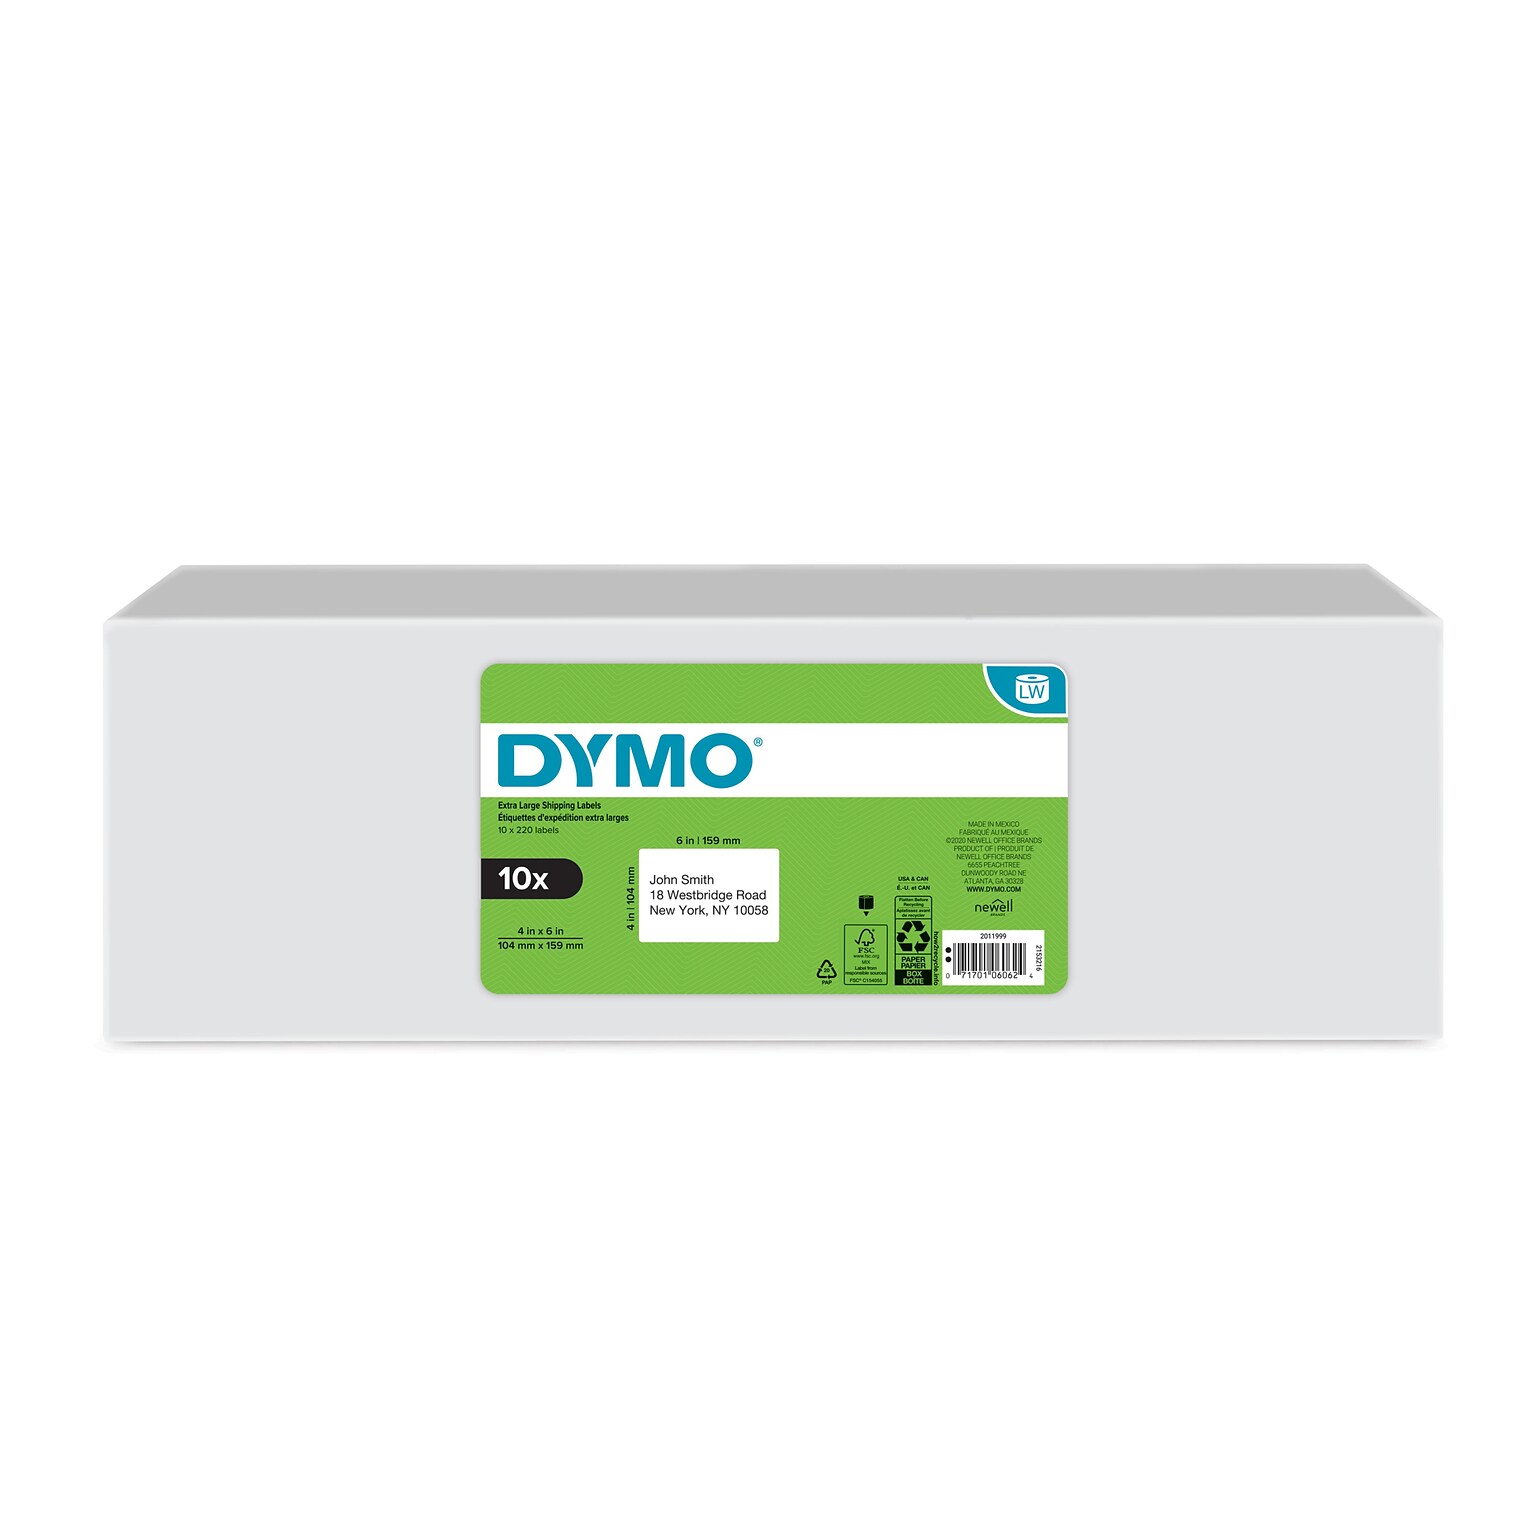 DYMO LabelWriter 2011999 Extra Large Shipping Labels, 4 x 6, Black on White, 220 Labels/Roll, 10 Rolls/Pack (2011999)